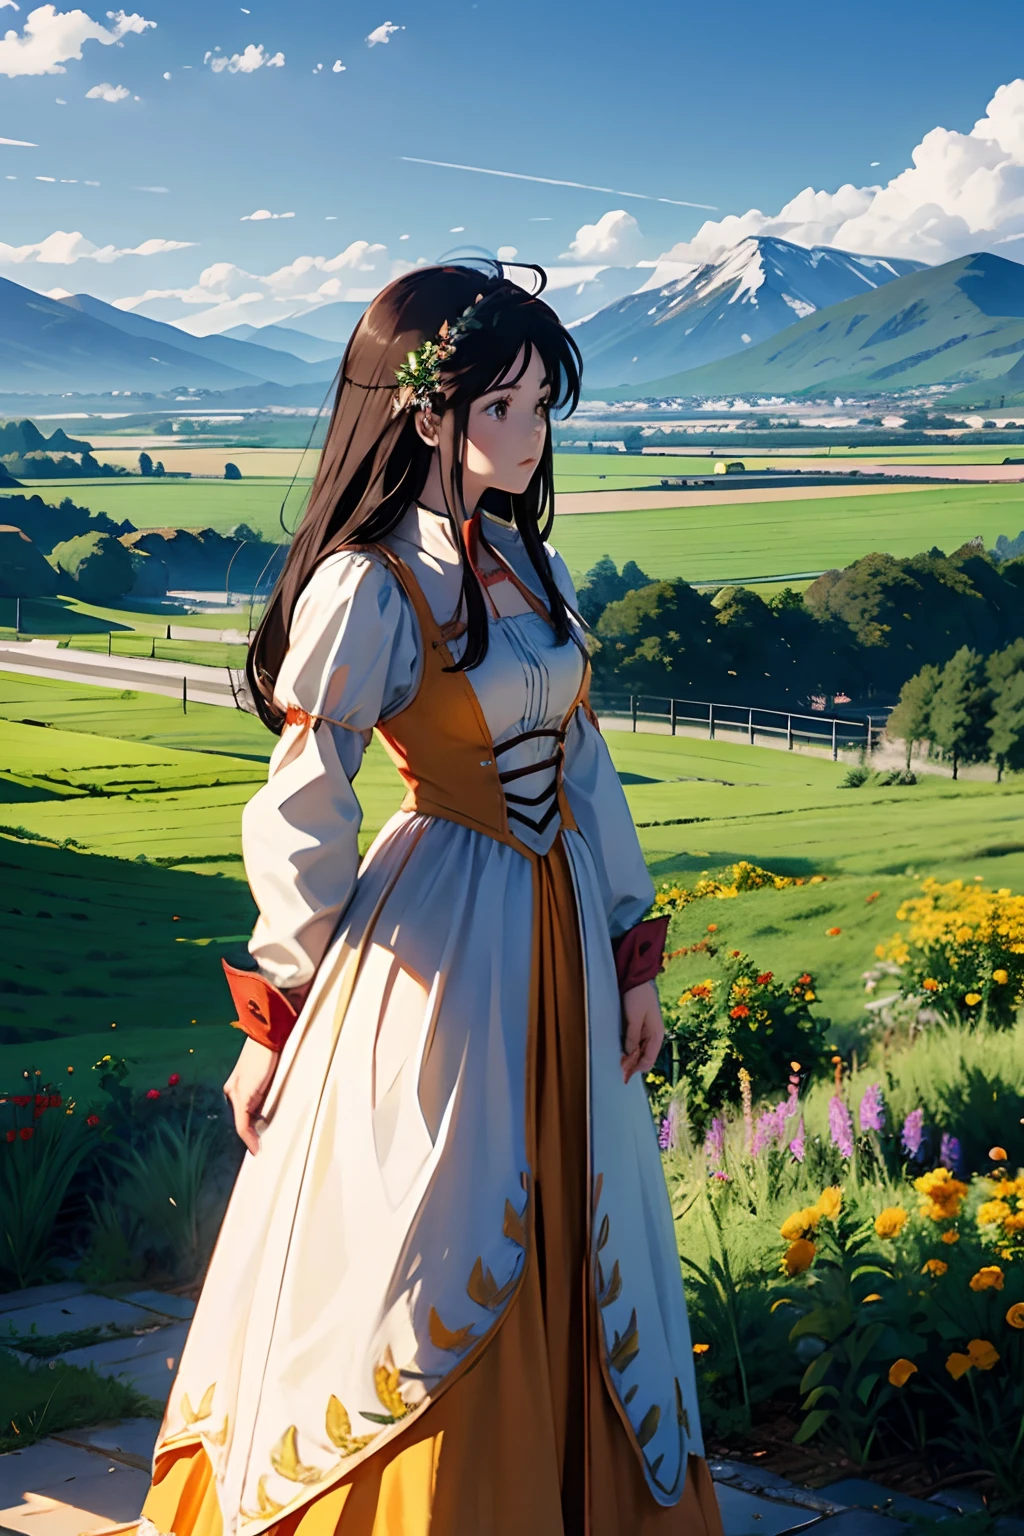 Princess Garnet wearing her classic orange and white outfit standing on a castle wall, POV shot over her shoulder, in the distance are wide green plains and fields. Flowers and agriculture are visible on the distant green fields. Far far in the distance are large snow topped mountains. The sky is clear blue with a few scattered clouds.